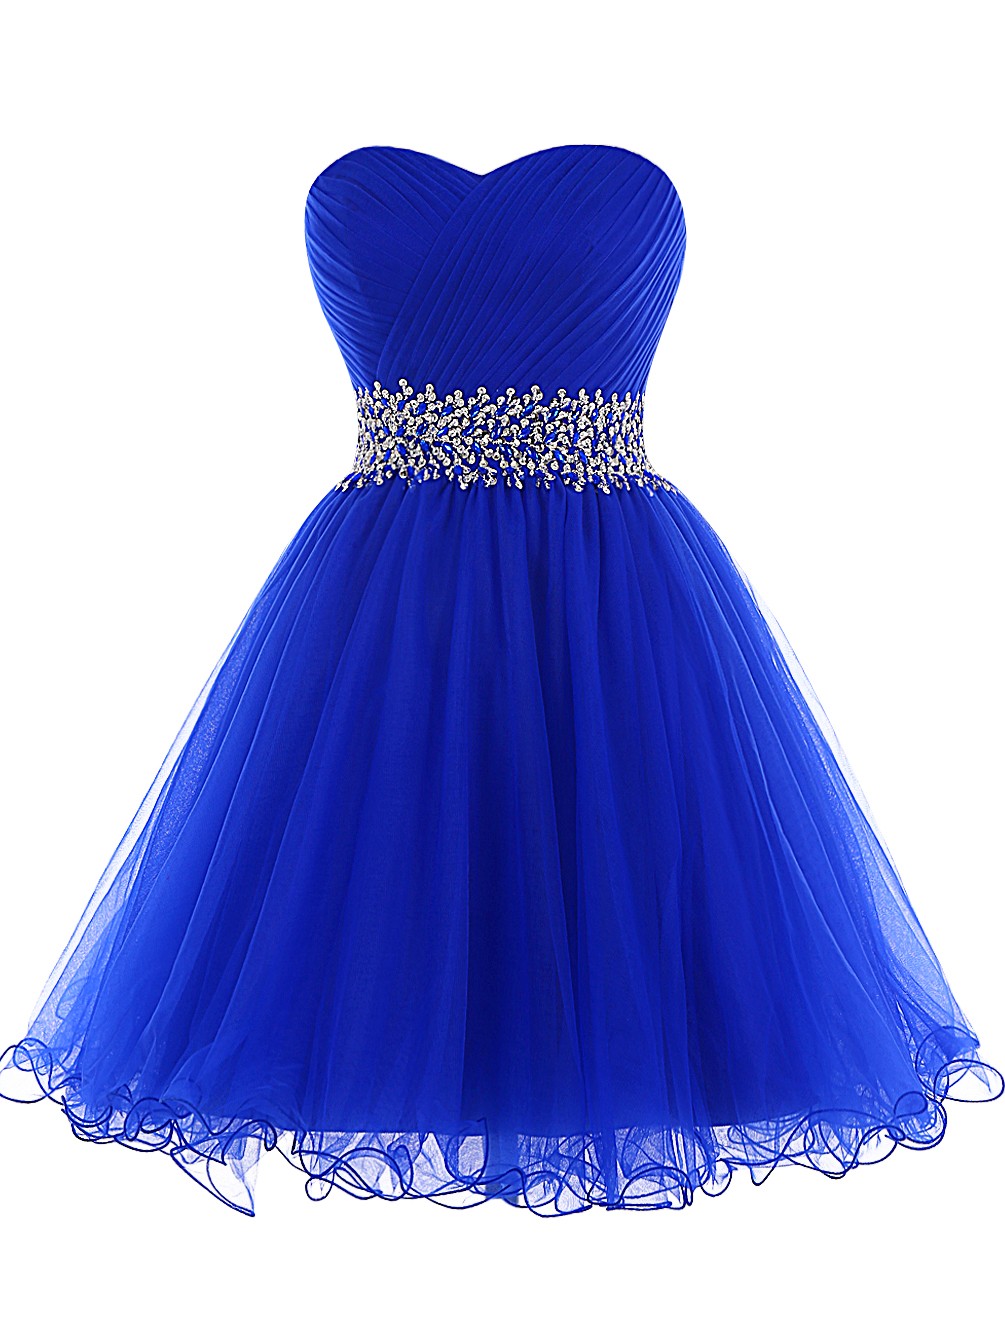 A-line Sweetheart Short Tulle Lace-up Beaded Royal Blue Cocktail Homecoming  Dress